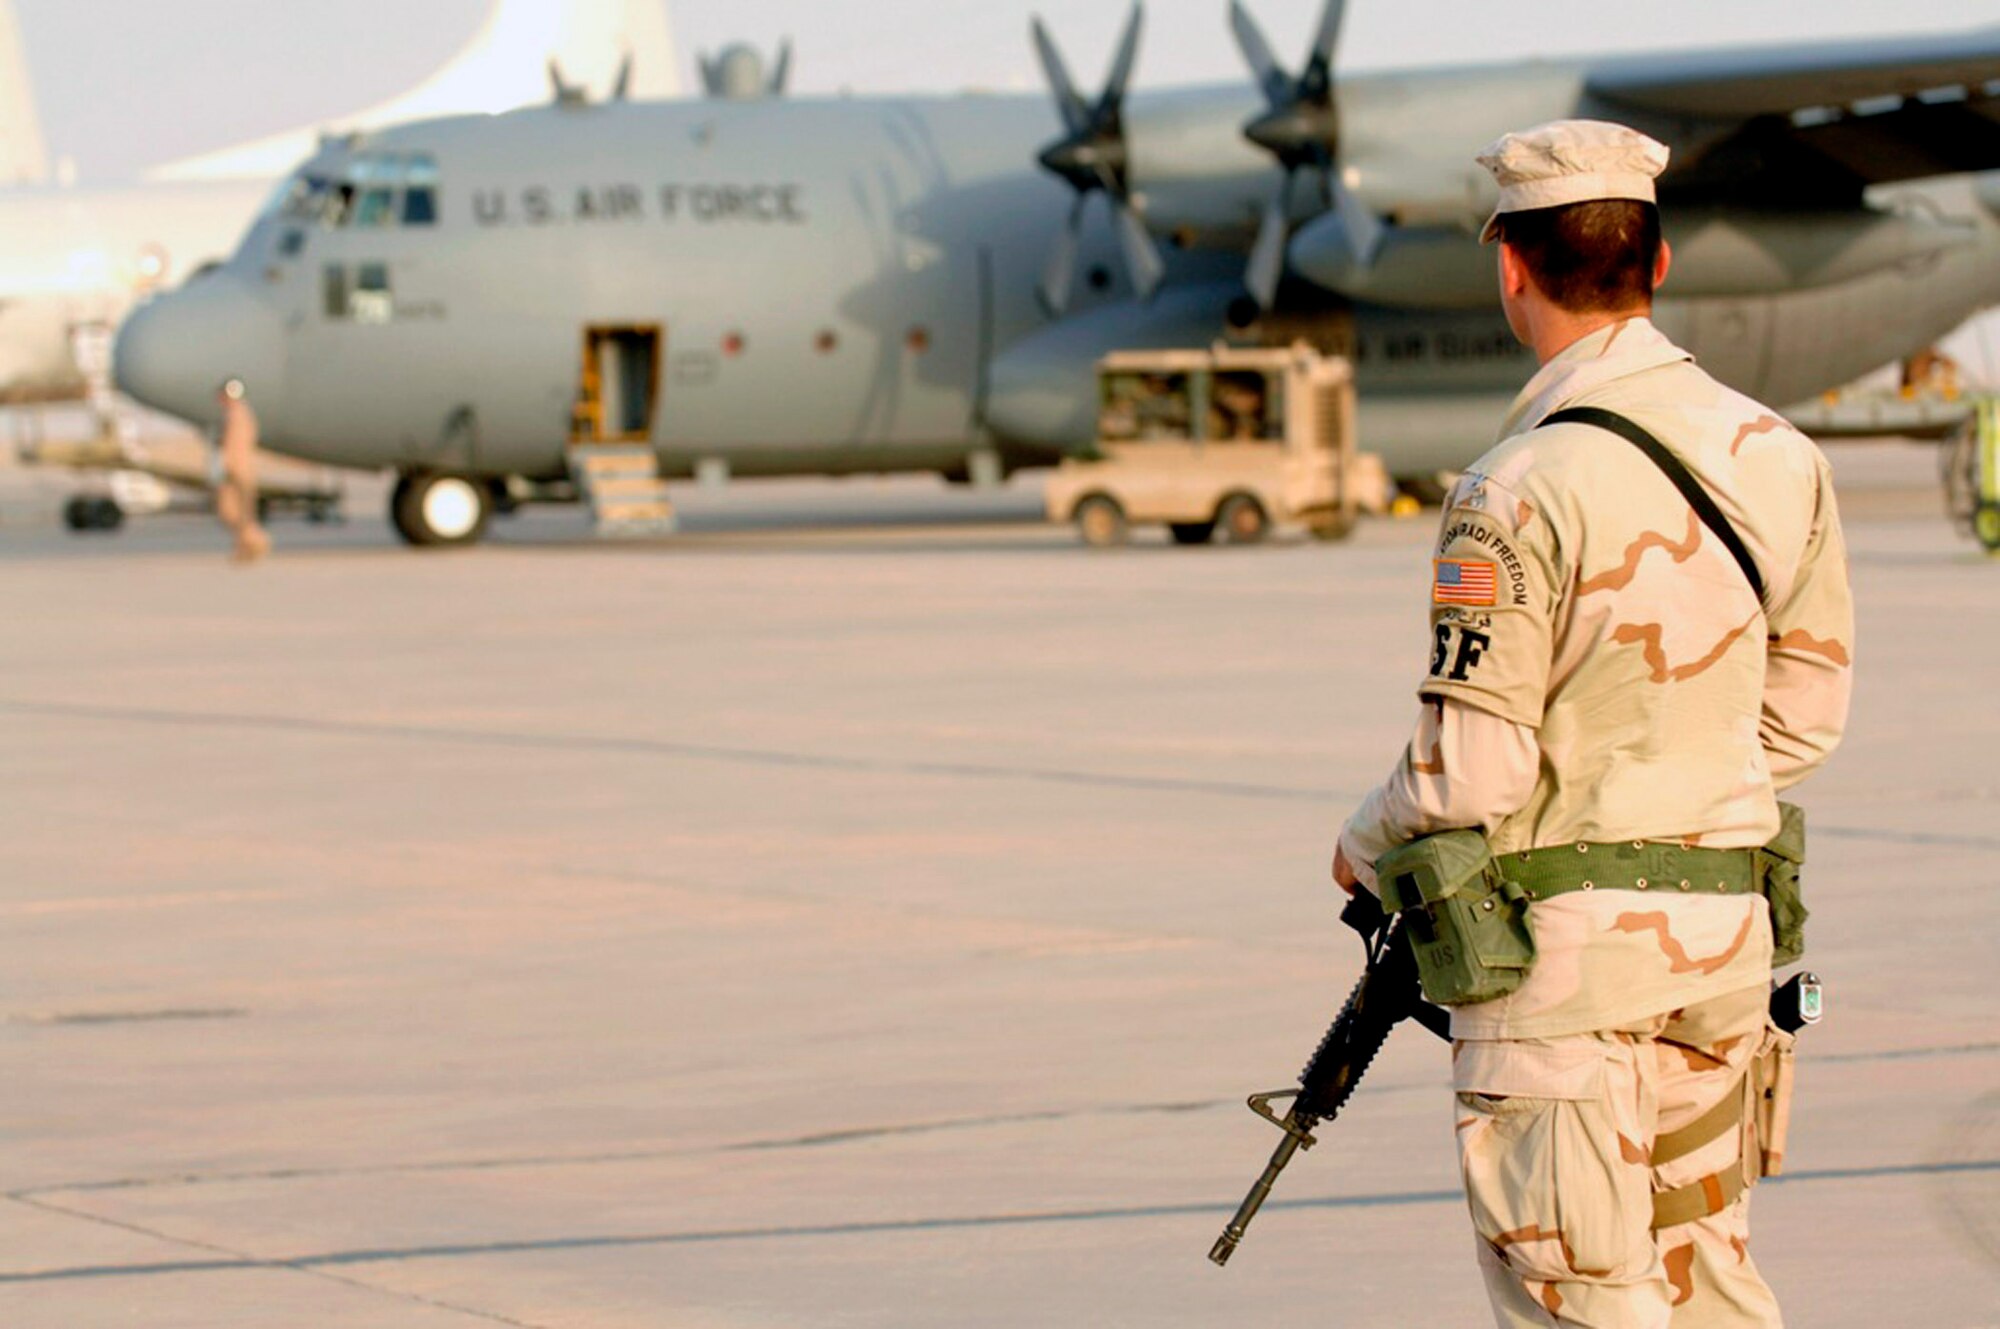 Airman 1st Class Morgan Constantino looks on as a C-130 Hercules crew begins their pre-flight inspection June 22 at Ali Air Base, Iraq.  Airman Constantino, a member of the 407th Expeditionary Security Forces Squadron, is assigned to flightline defense, protecting U.S. and coalition assets from insurgent intelligence gathering efforts and attacks. (U.S. Air Force photo/Master Sgt. Robert W. Valenca)